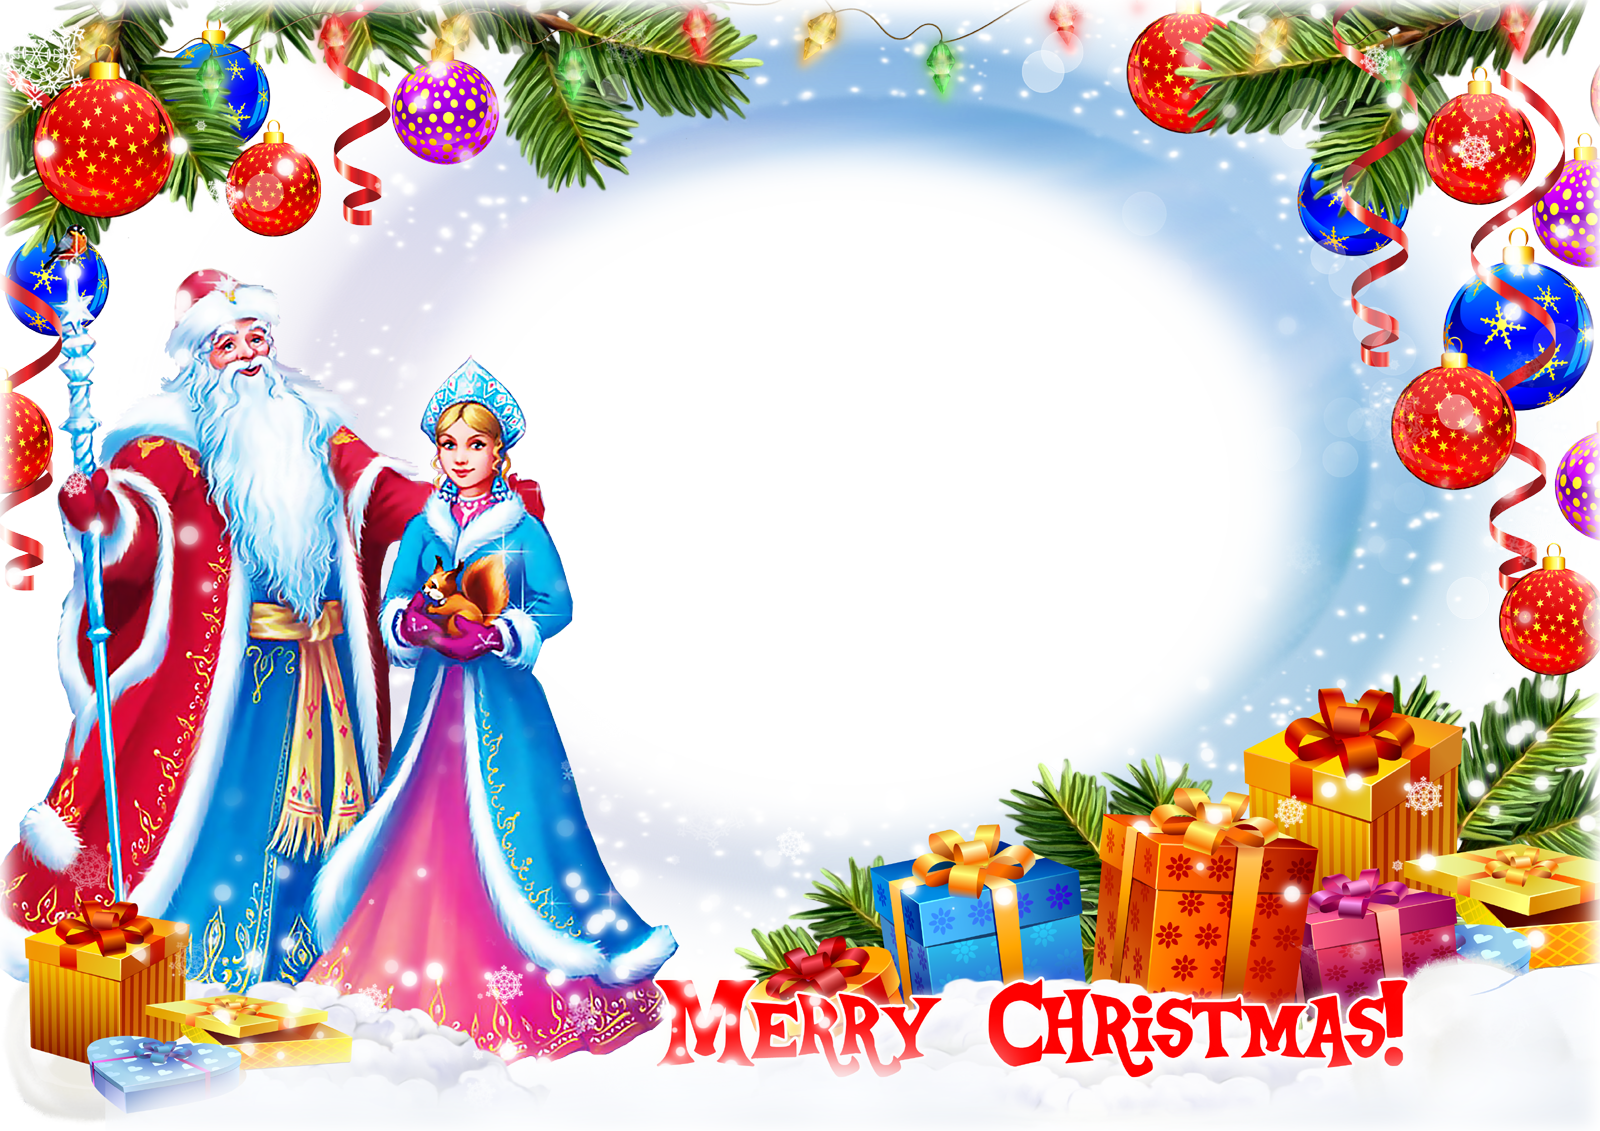 Merry christmas frame png. Free frames images with